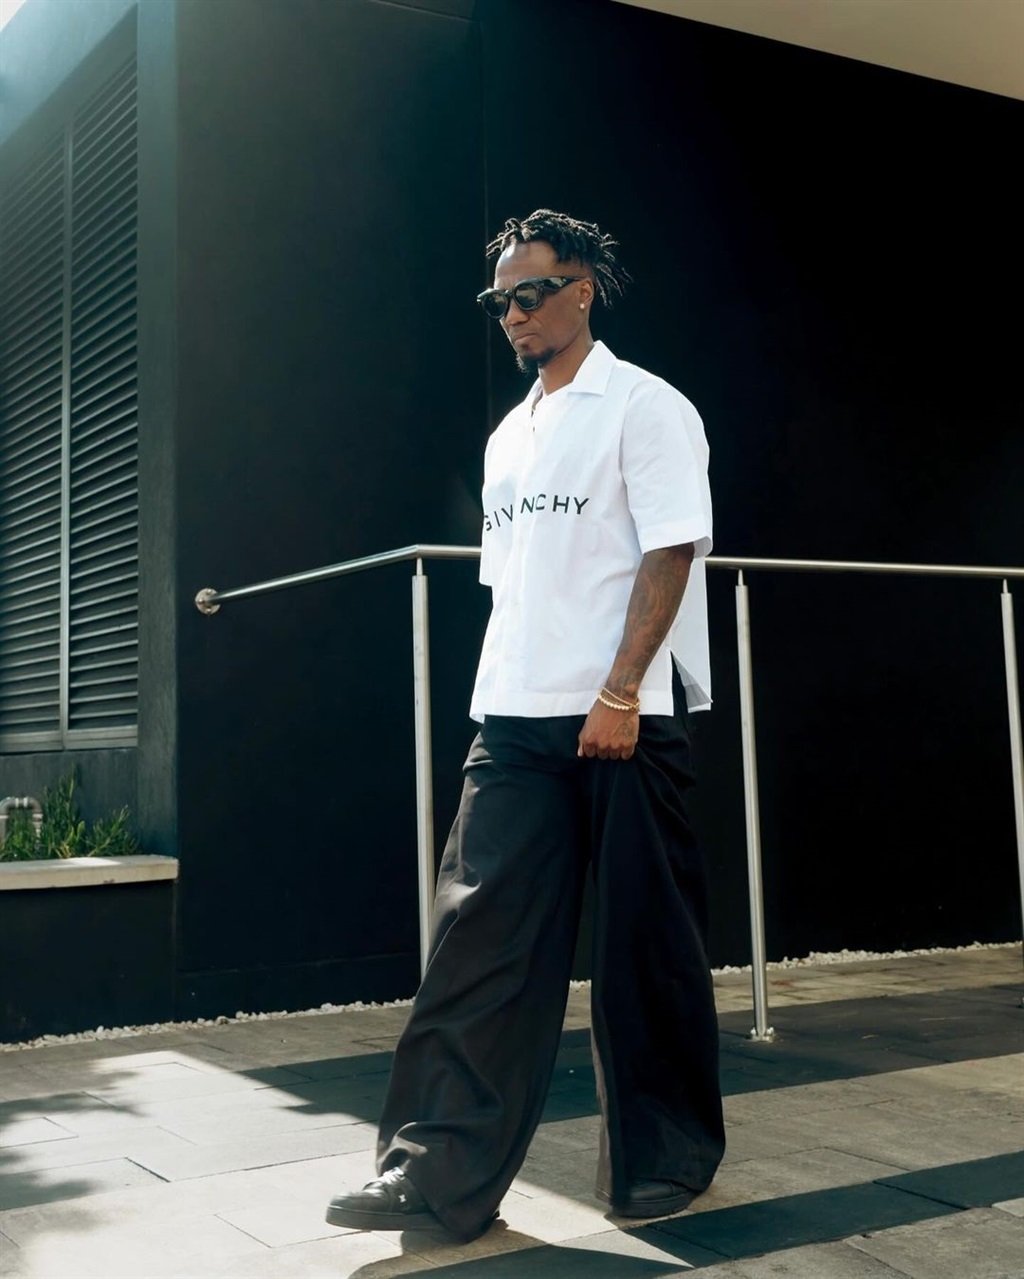 Teko Modise styled in quite the pricey 'fit on his